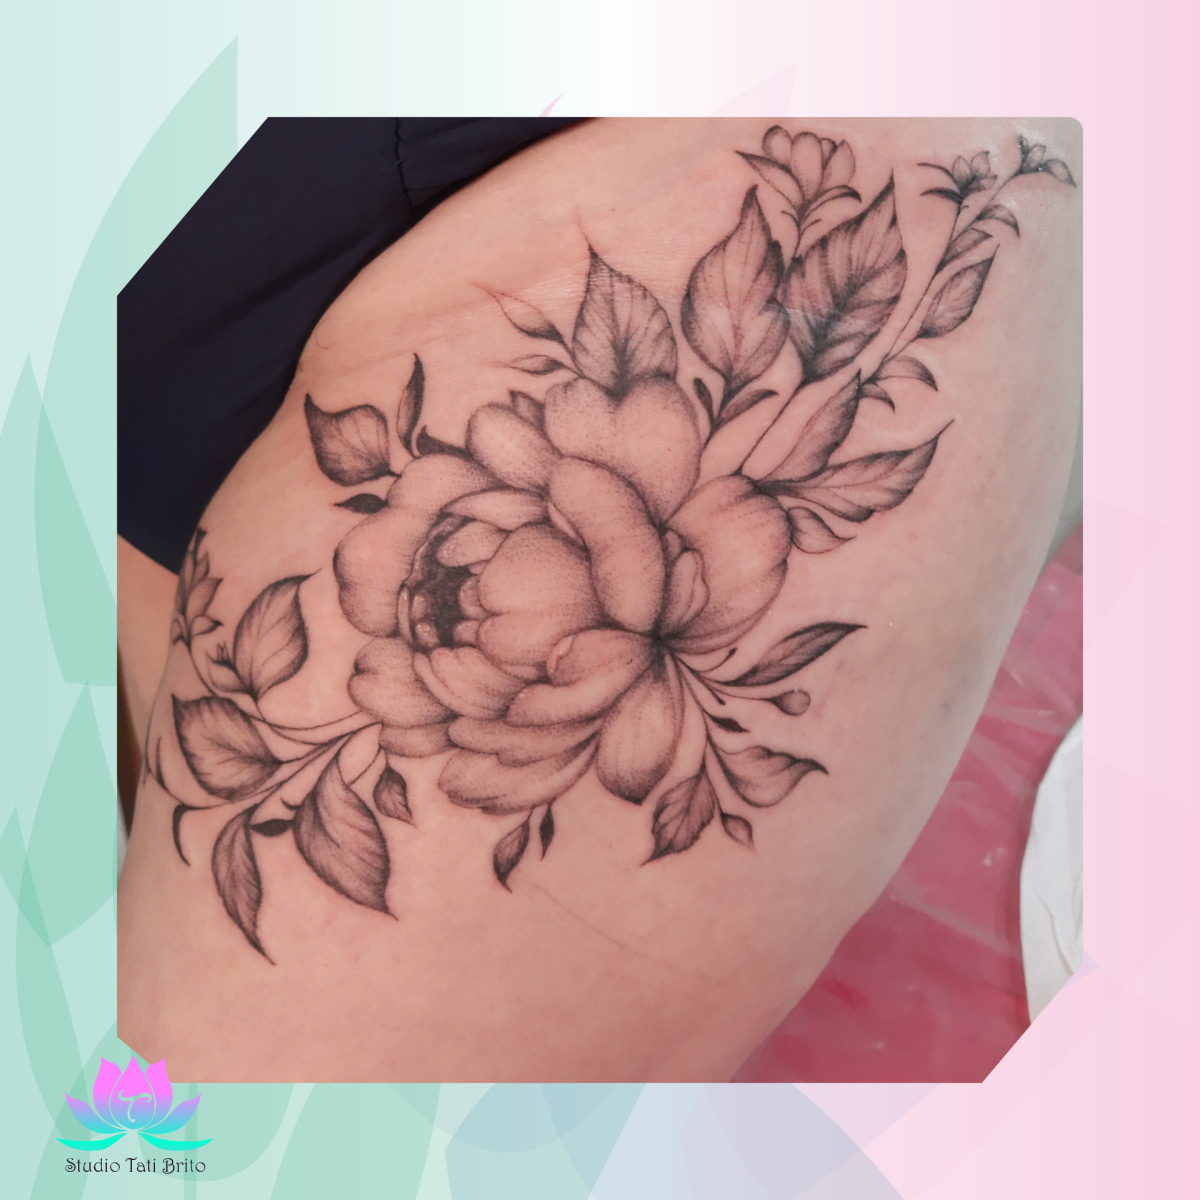 31 Floral Tattoo Designs That Are Both Pretty and Meaningful  See Photos   Allure